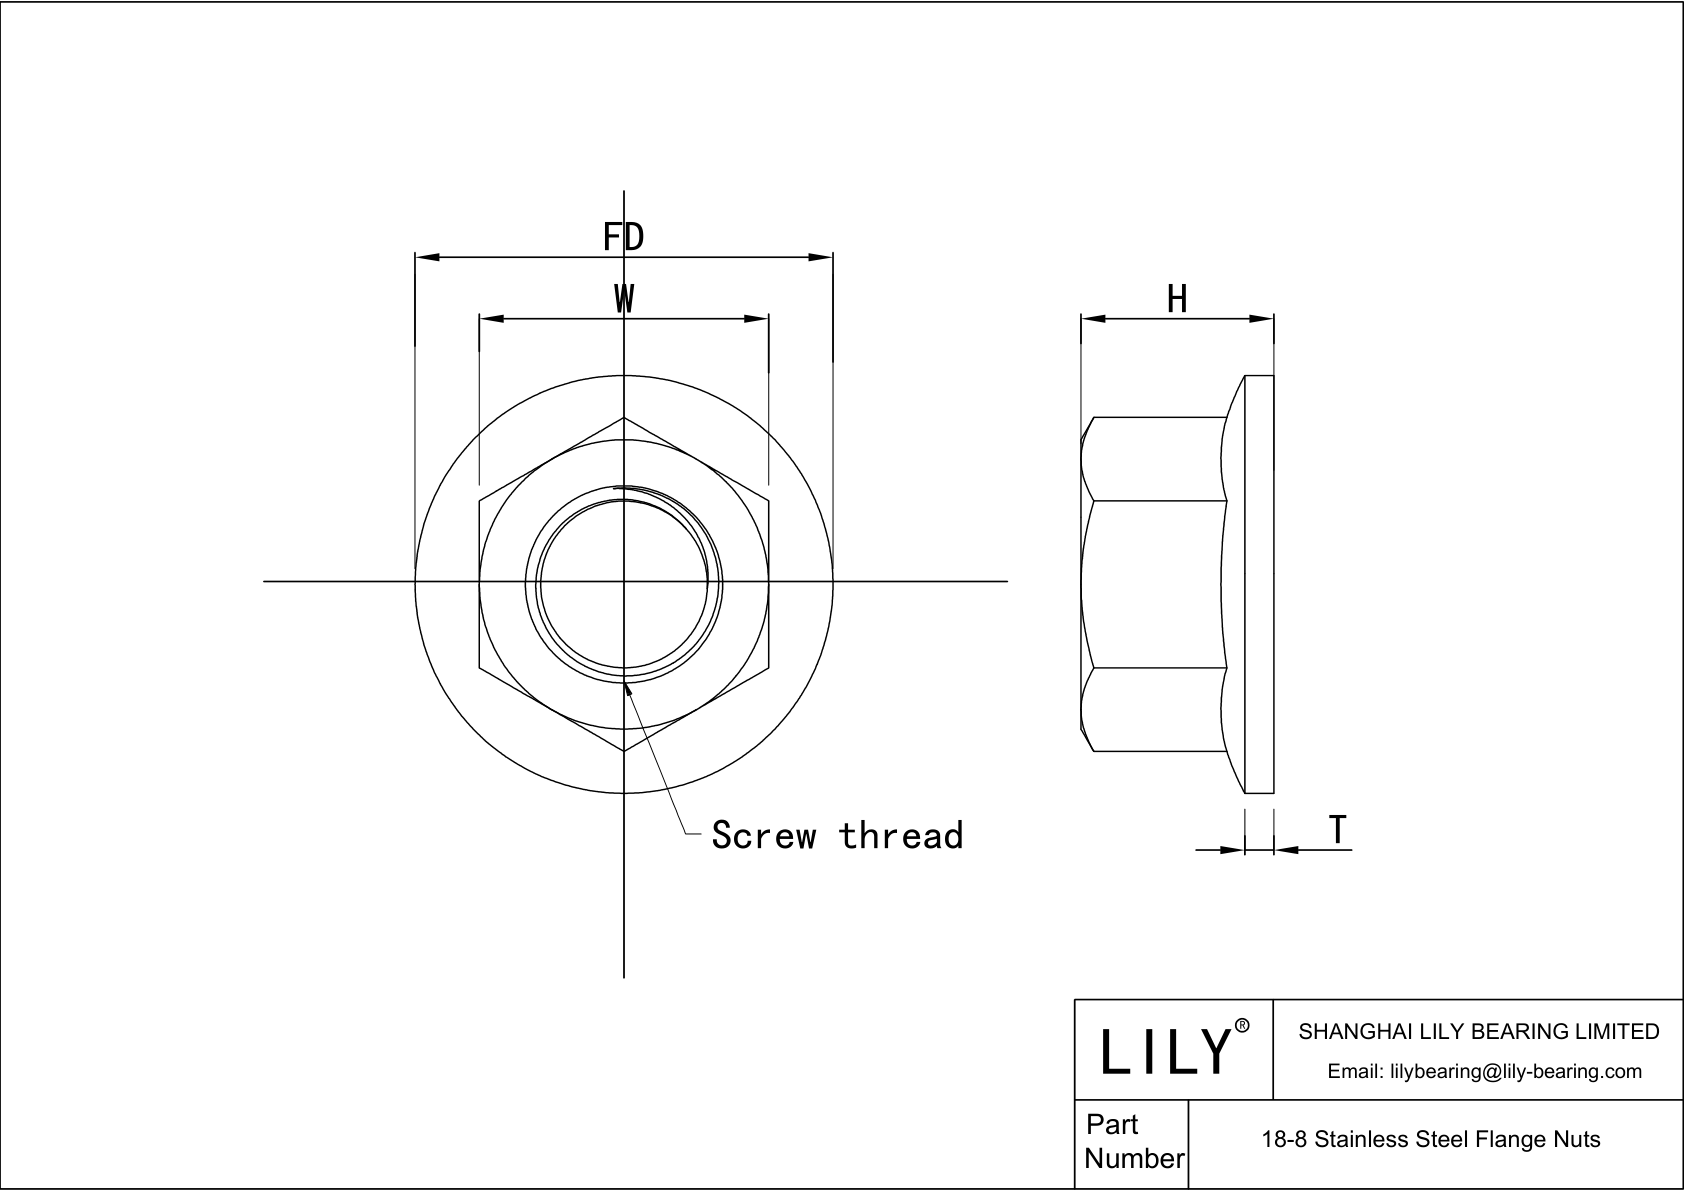 JEHFIAADC 18-8 Stainless Steel Flange Nuts cad drawing